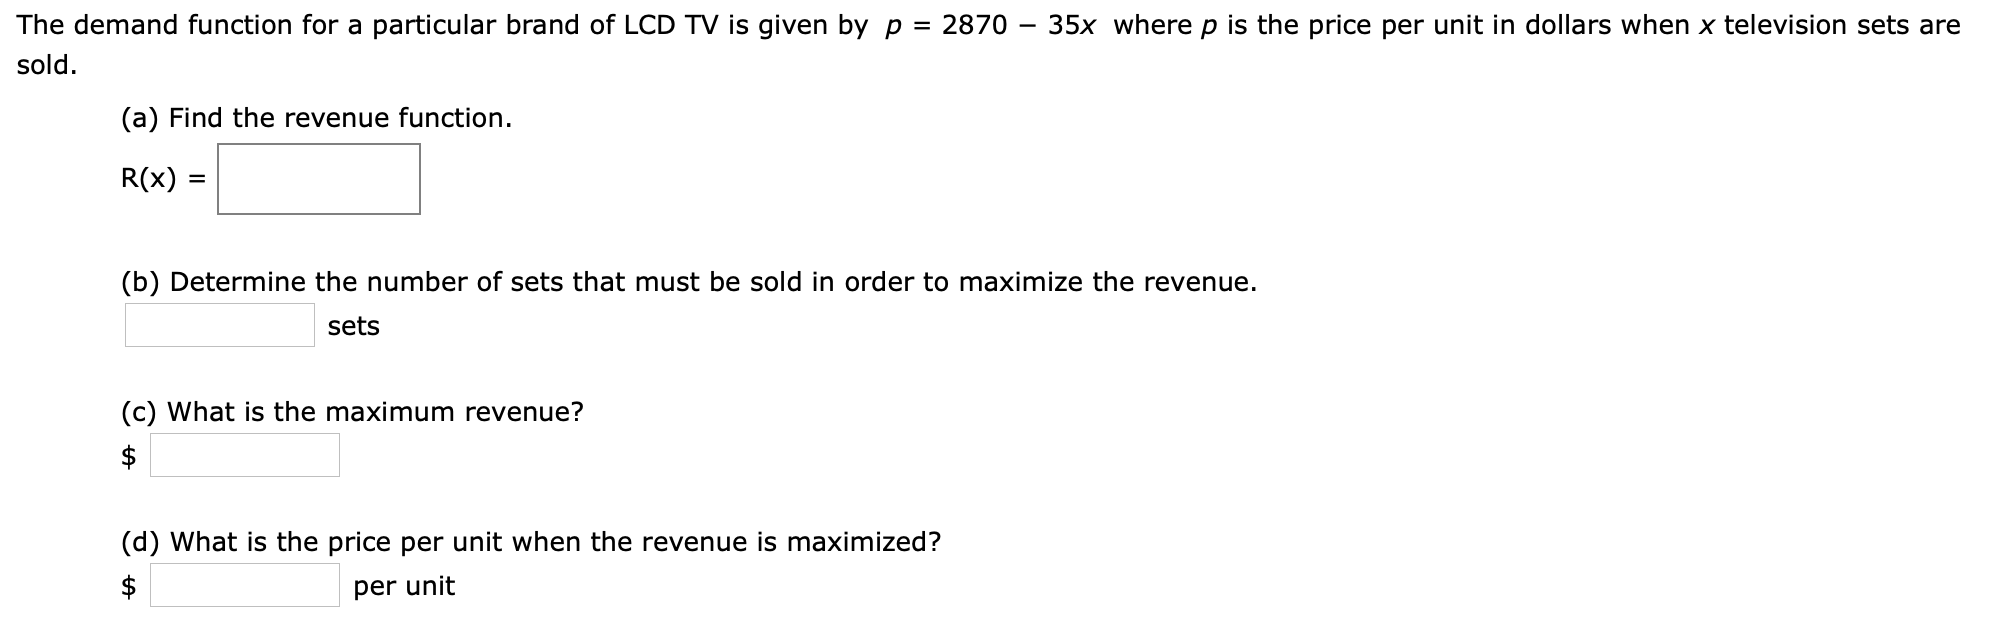 The demand function for a particular brand of LCD TV is given by p = 2870 - 35x where p is the price per unit in dollars when x television sets are
sold
(a) Find the revenue function.
R(x)
(b) Determine the number of sets that must be sold in order to maximize the revenue
sets
(c) What is the maximum revenue?
$
(d) What is the price per unit when the revenue is maximized?
$
per unit
